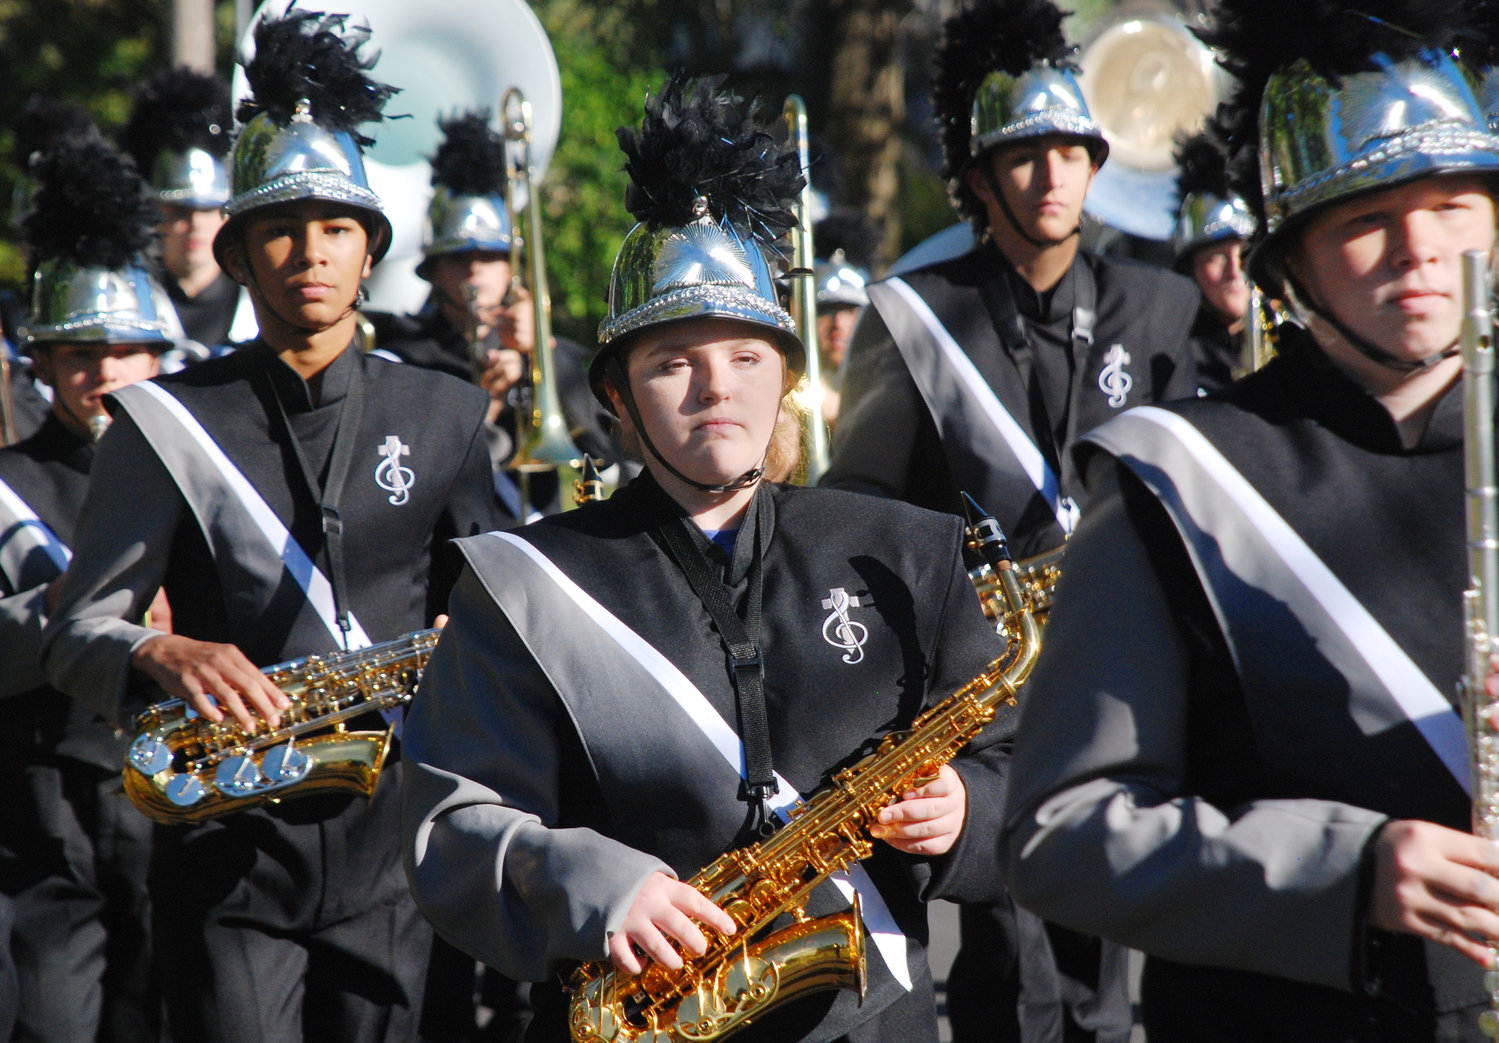 SAXOPHONE PLAYERS walk to the beat of a marching drum as the Sparta High School Marching band proceeds south along North Oak Avenue on Oct. 16.